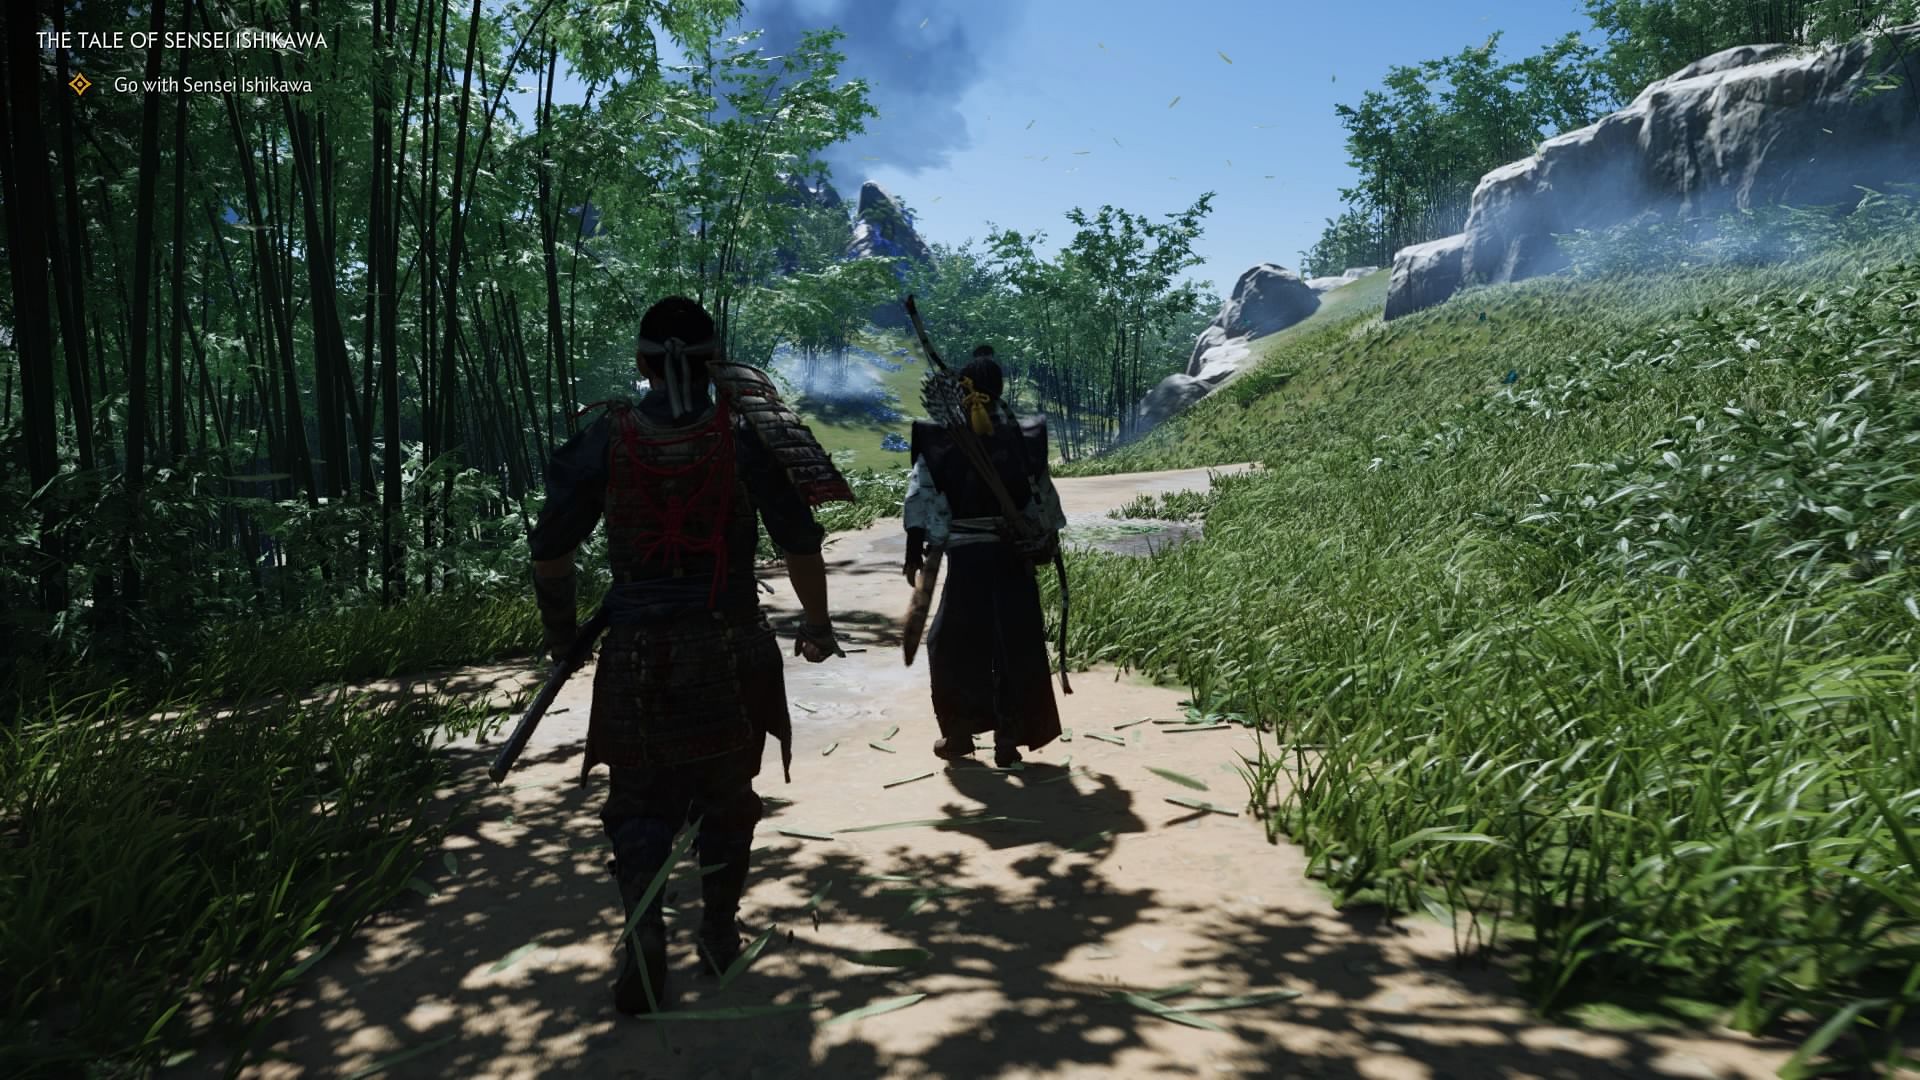 Ghost of Tsushima Review: Gameplay, Walkthrough, Tips, Tricks, Images & More